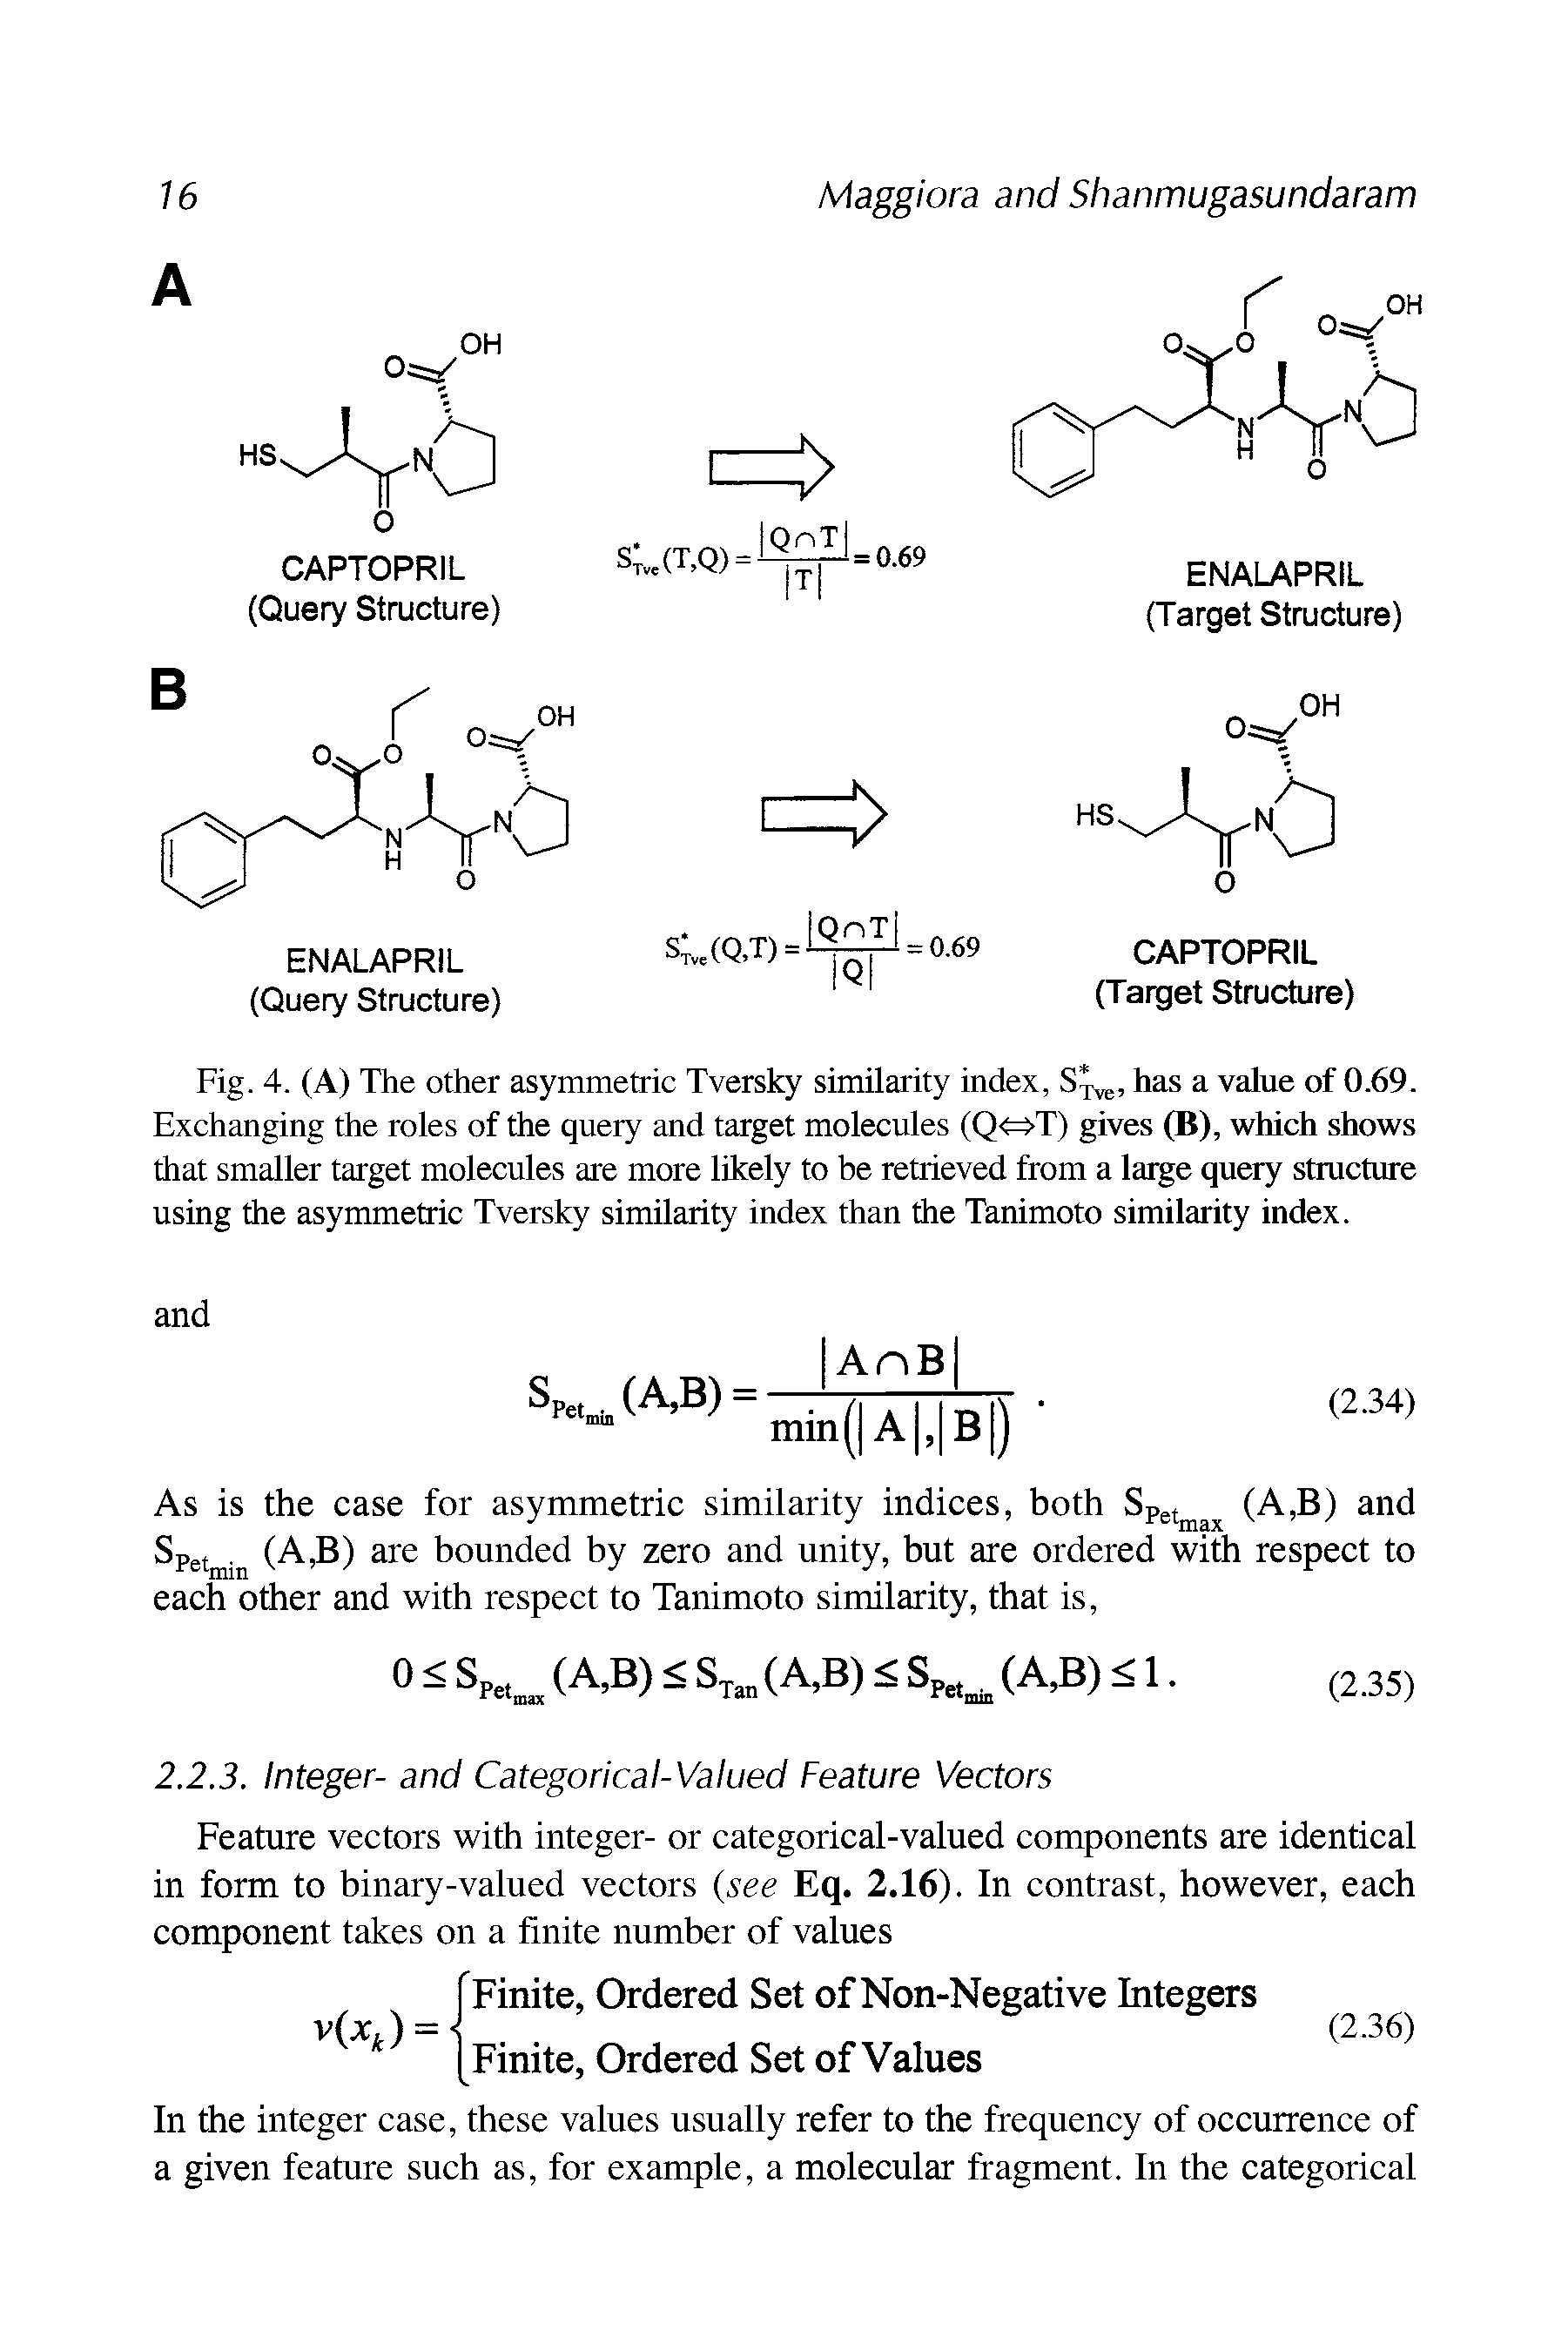 Fig. 4. (A) The other asymmetric Tversky similarity index, S VC, has a value of 0.69. Exchanging the roles of the query and target molecules (Q<=>T) gives (B), which shows that smaller target molecules are more likely to be retrieved from a large query structure using the asymmetric Tversky similarity index than the Tanimoto similarity index.